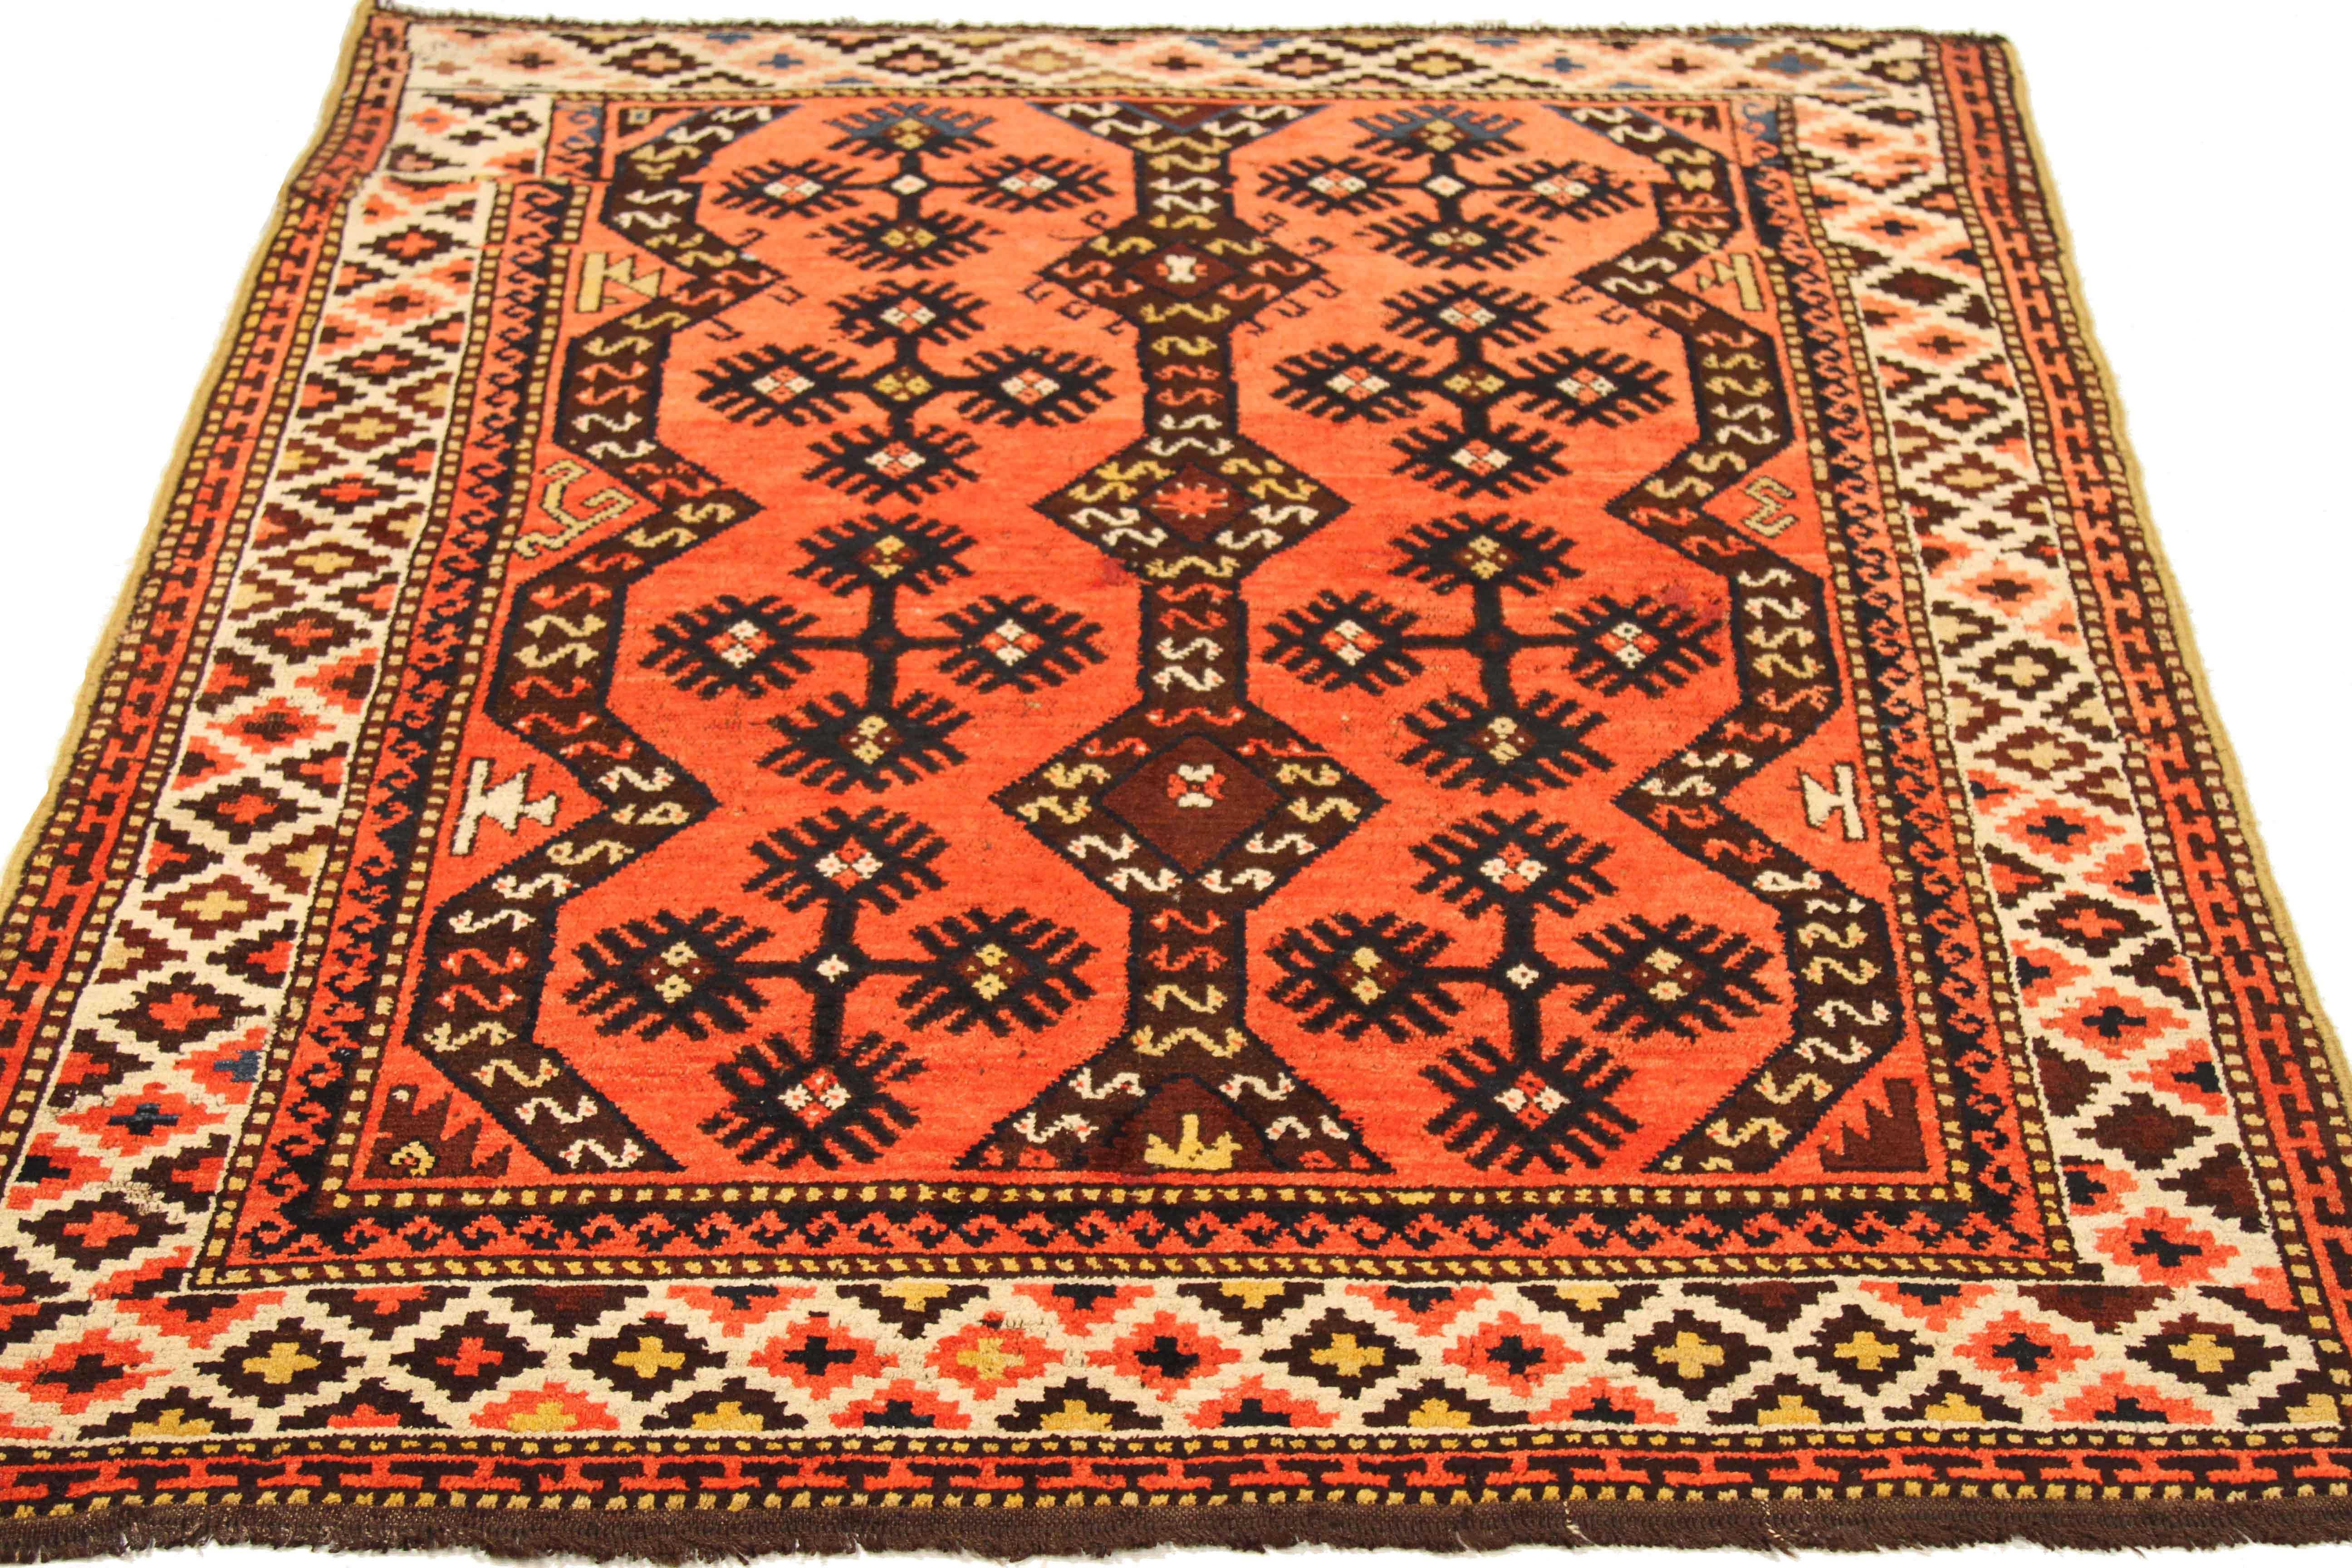 Antique Afghan area rug handwoven from the finest sheep’s wool. It’s colored with all-natural vegetable dyes that are safe for humans and pets. It’s a traditional Afghan design handwoven by expert artisans. It’s a lovely area rug that can be